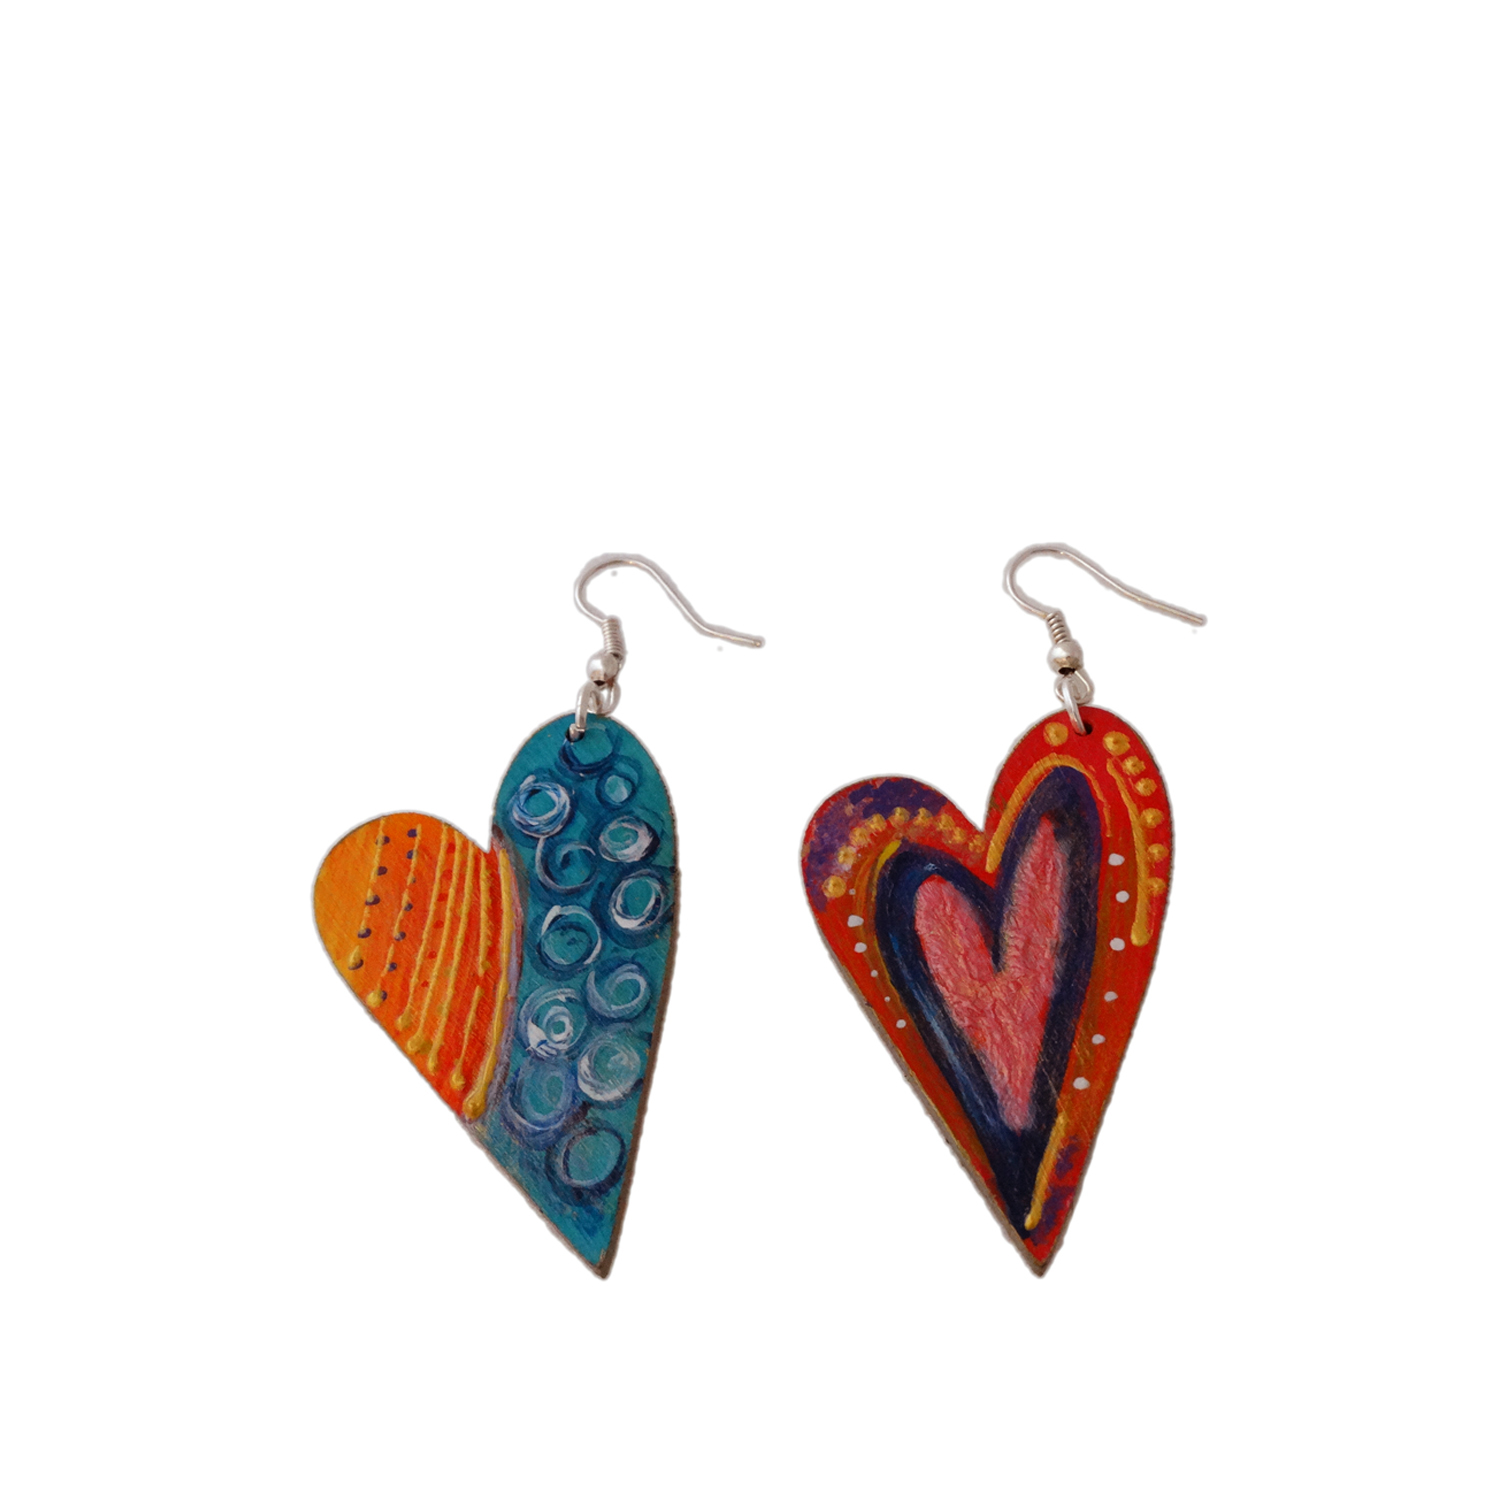 Hand-painted earrings - Love is all